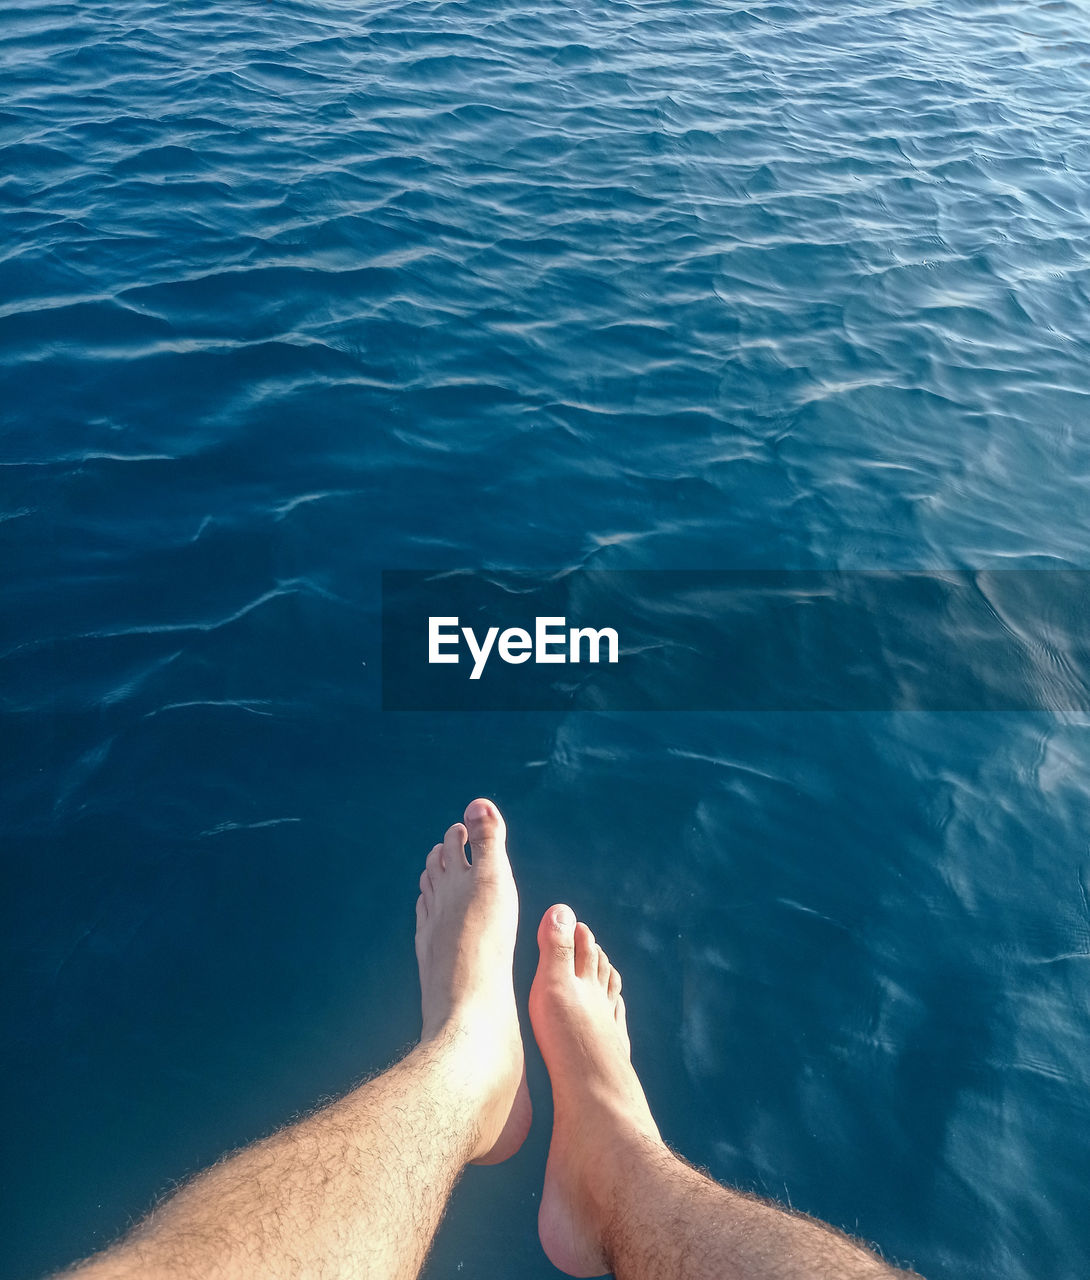 water, low section, human leg, personal perspective, sea, barefoot, nature, one person, lifestyles, leisure activity, adult, human foot, holiday, ocean, vacation, trip, relaxation, day, high angle view, limb, human limb, men, outdoors, rippled, sunlight, summer, women, swimming, beauty in nature, blue, tranquility, underwater, travel